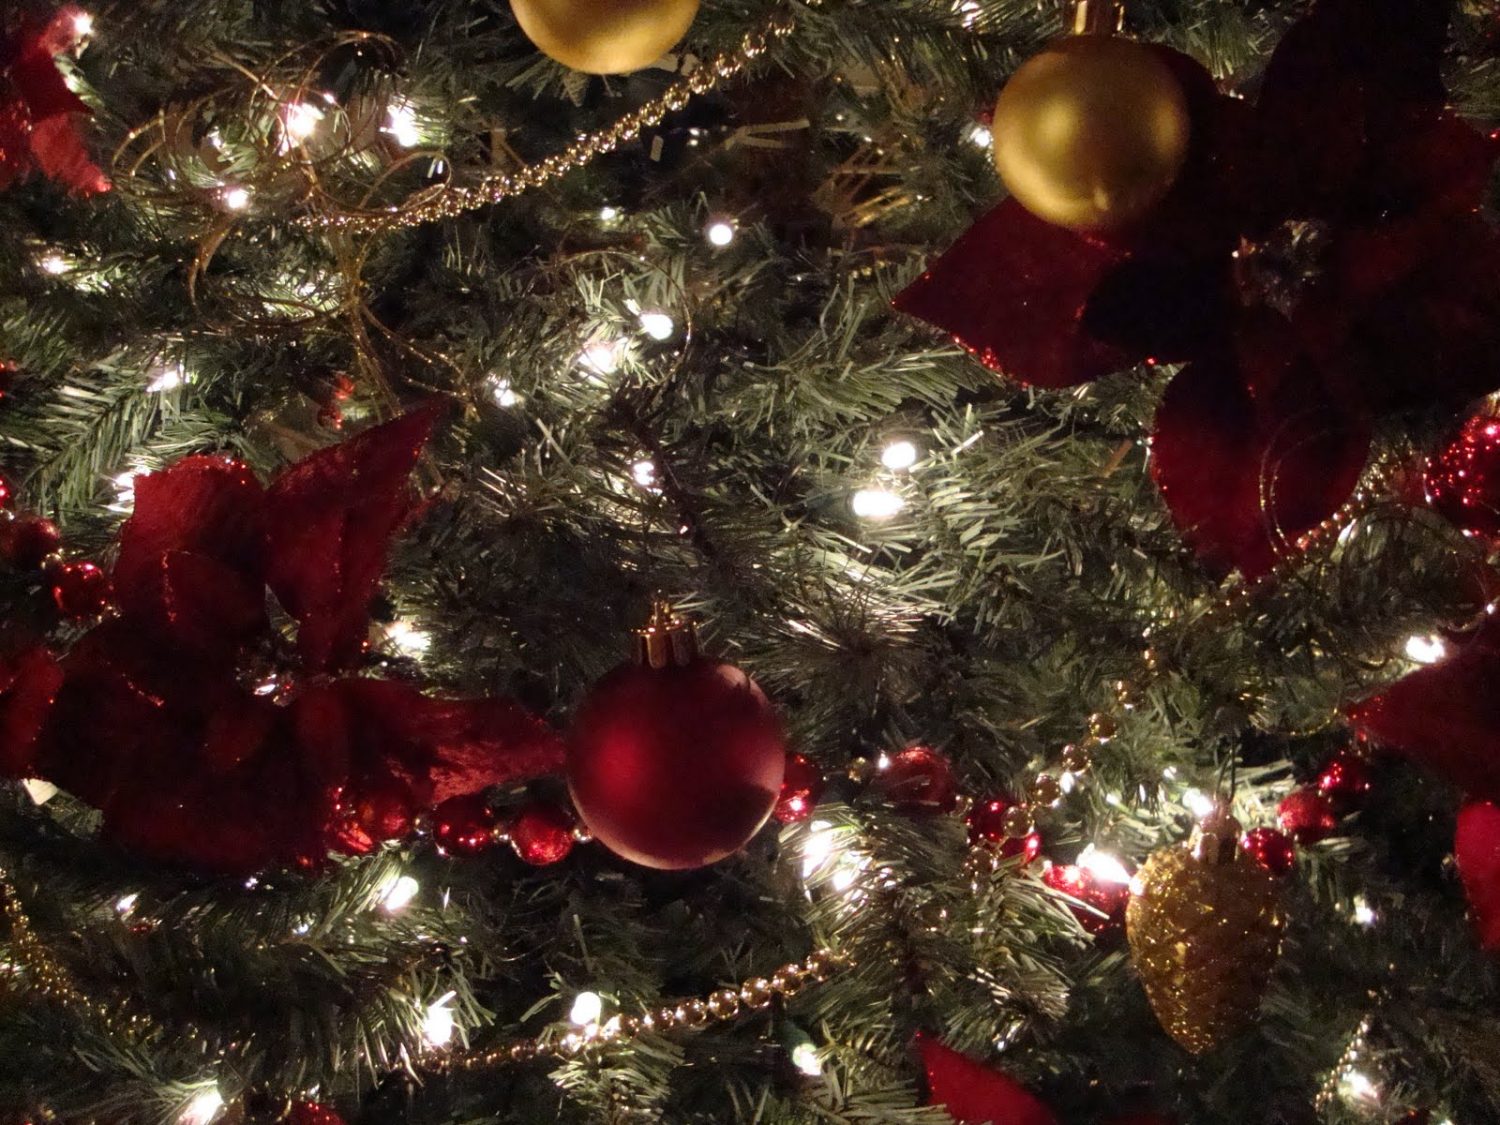 Solved: Christmas Tree Decorating Challenges